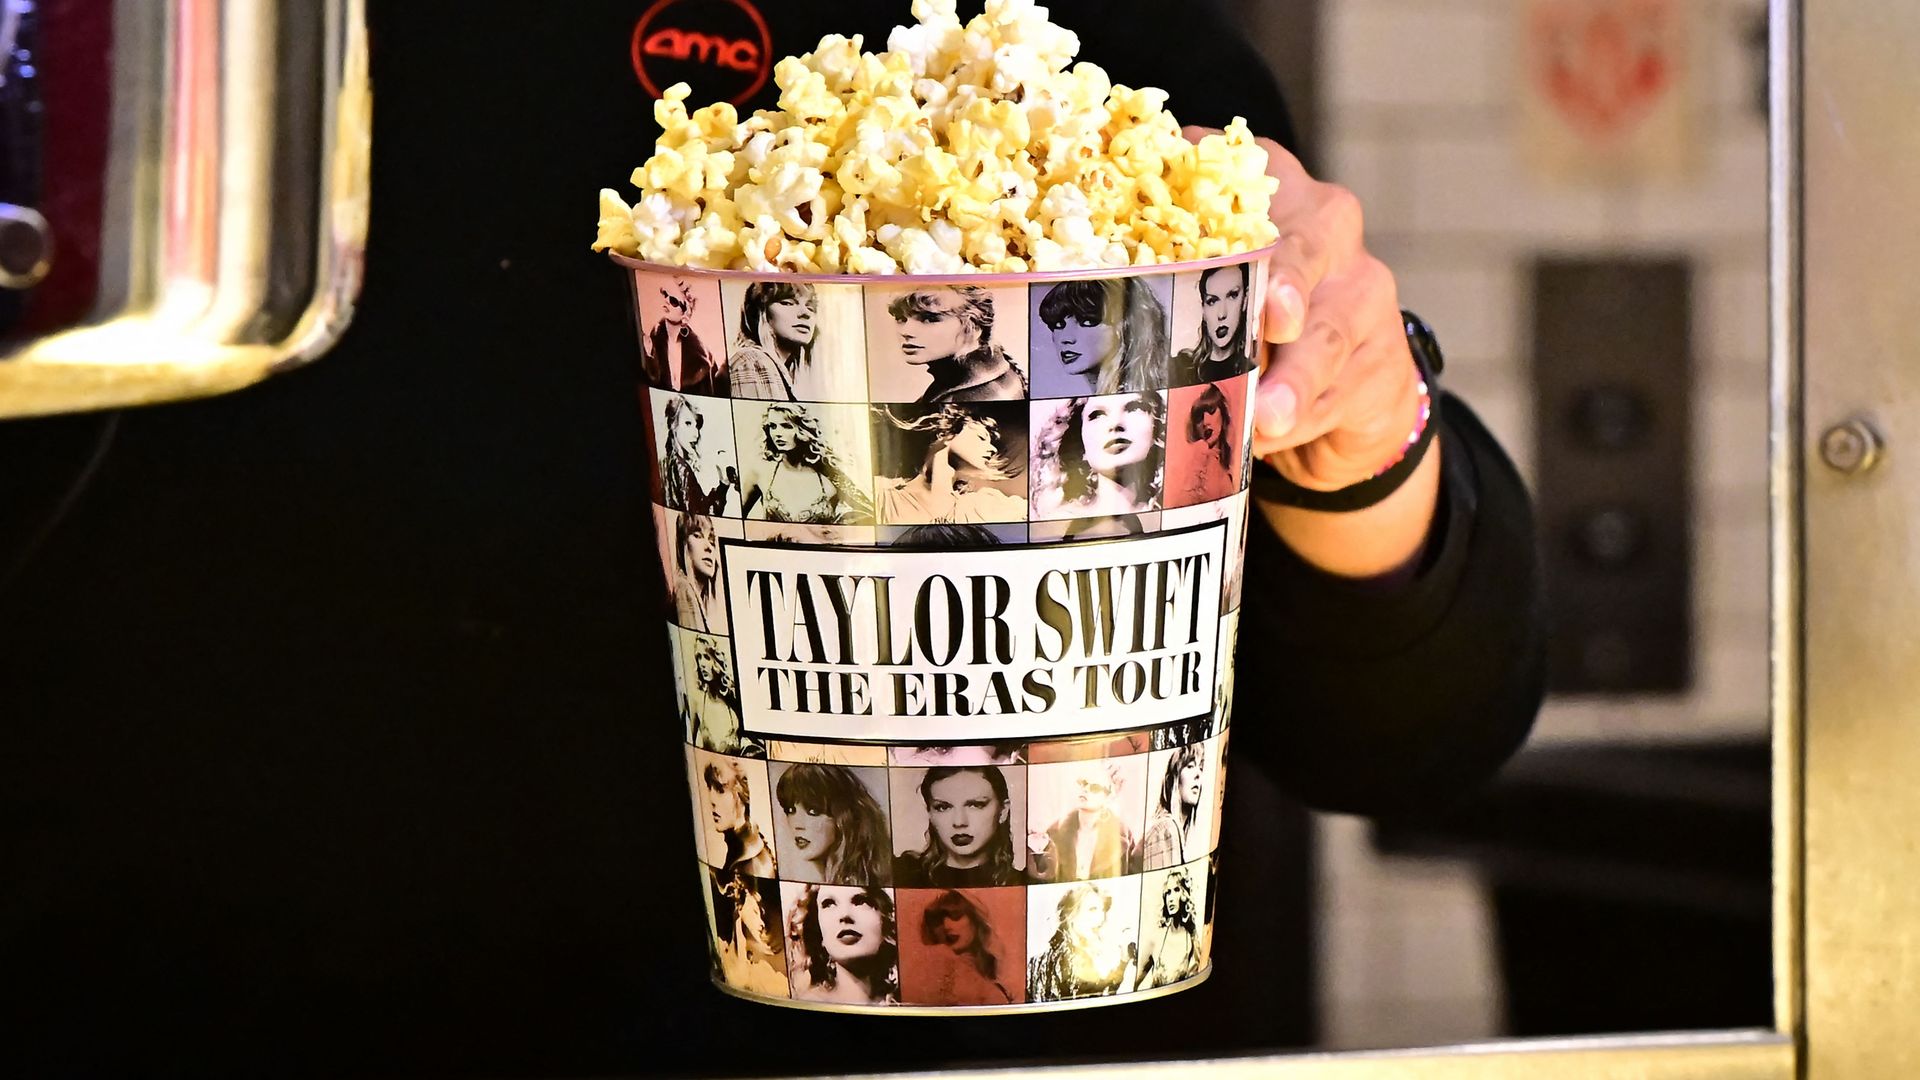 A tub of popcorn in US singer Taylor Swift's merchandise is pictured.